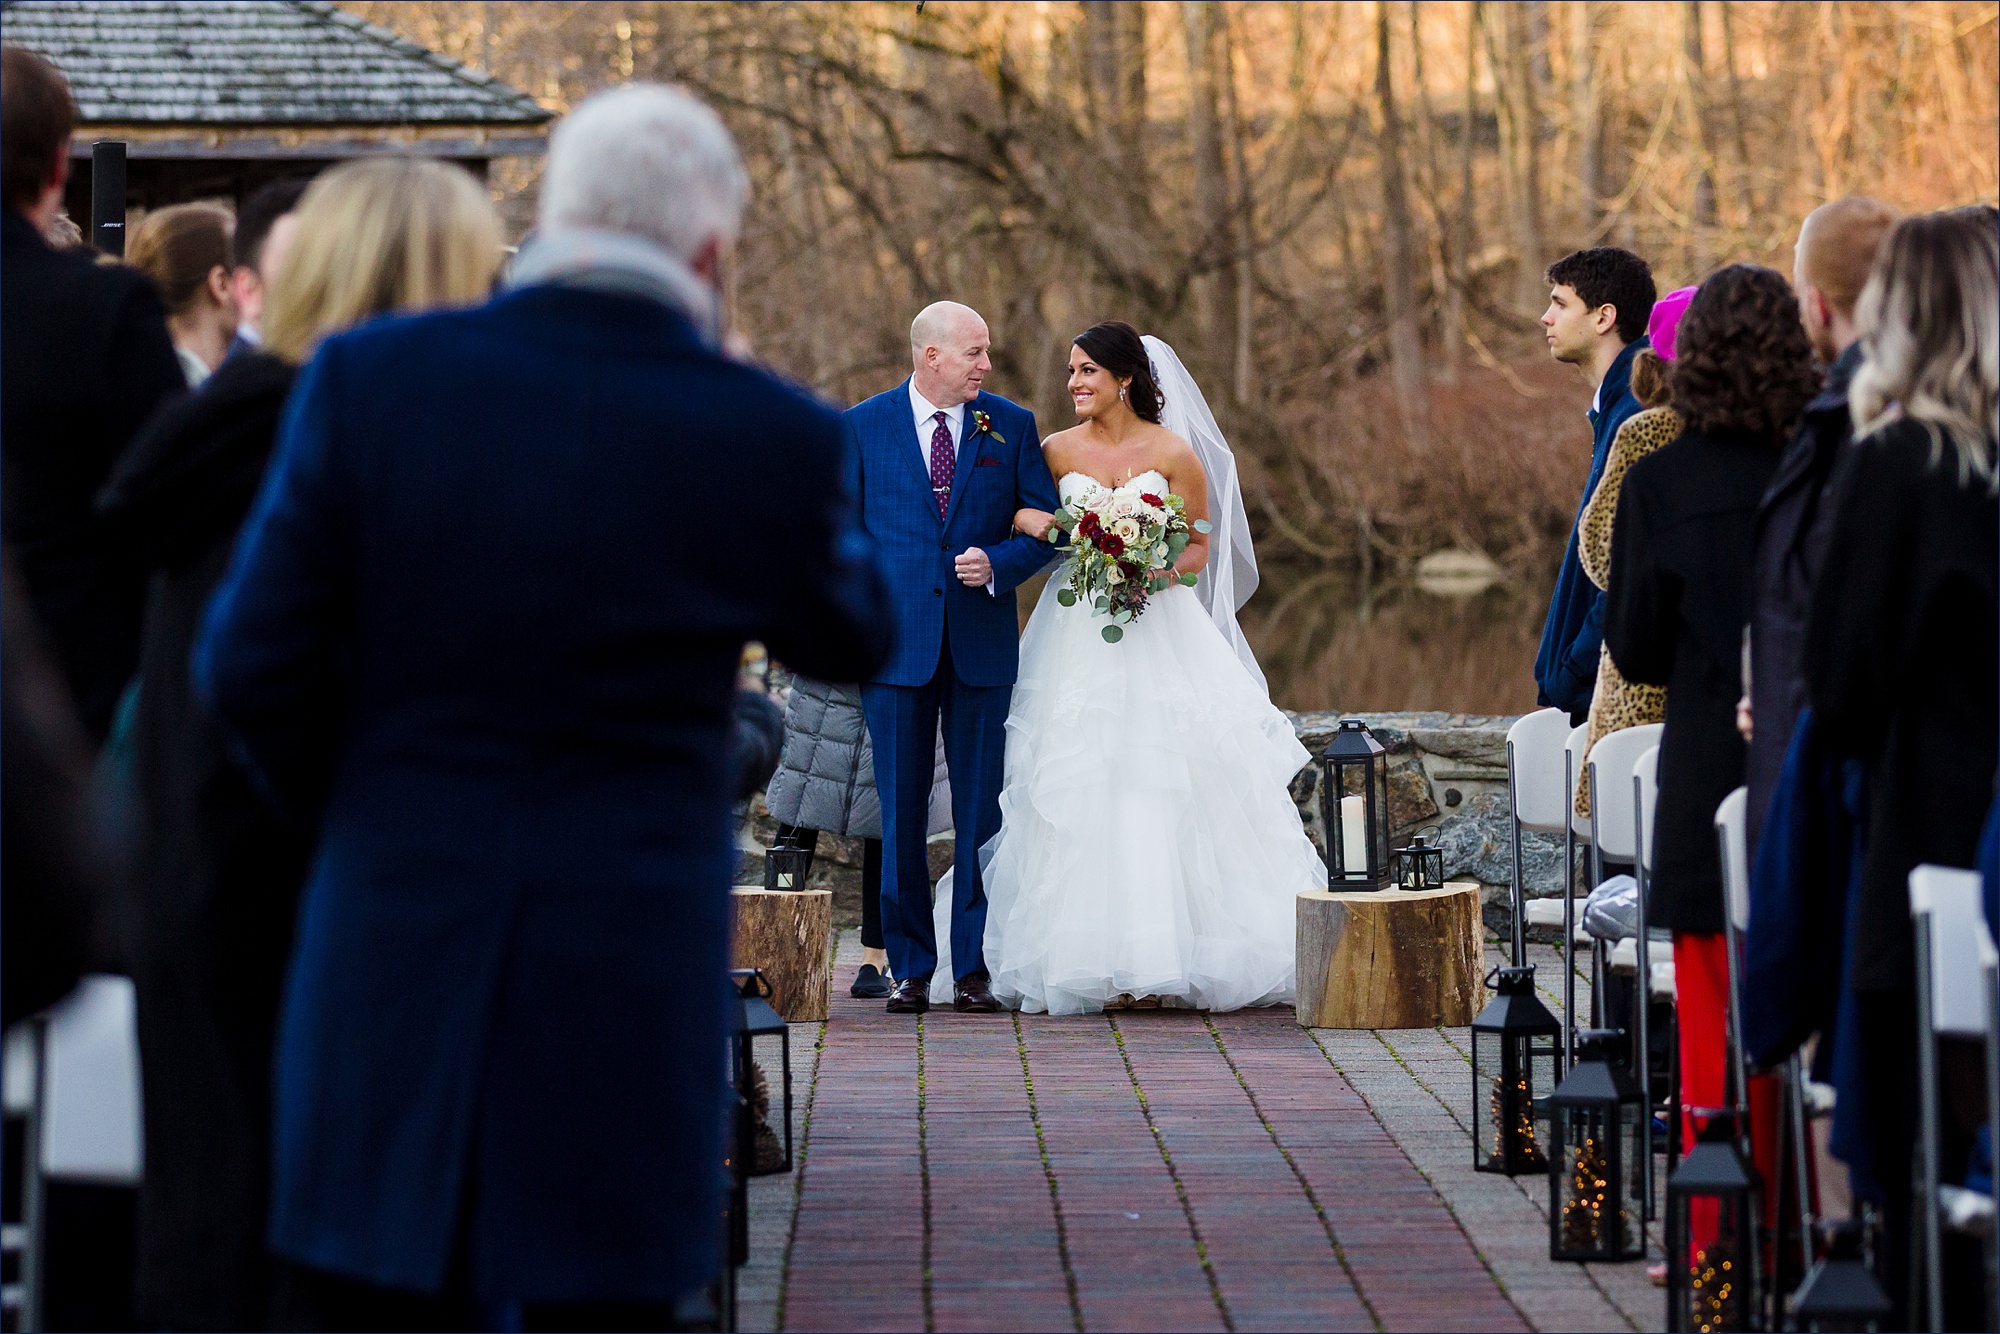 The bride and her father walk down the aisle together